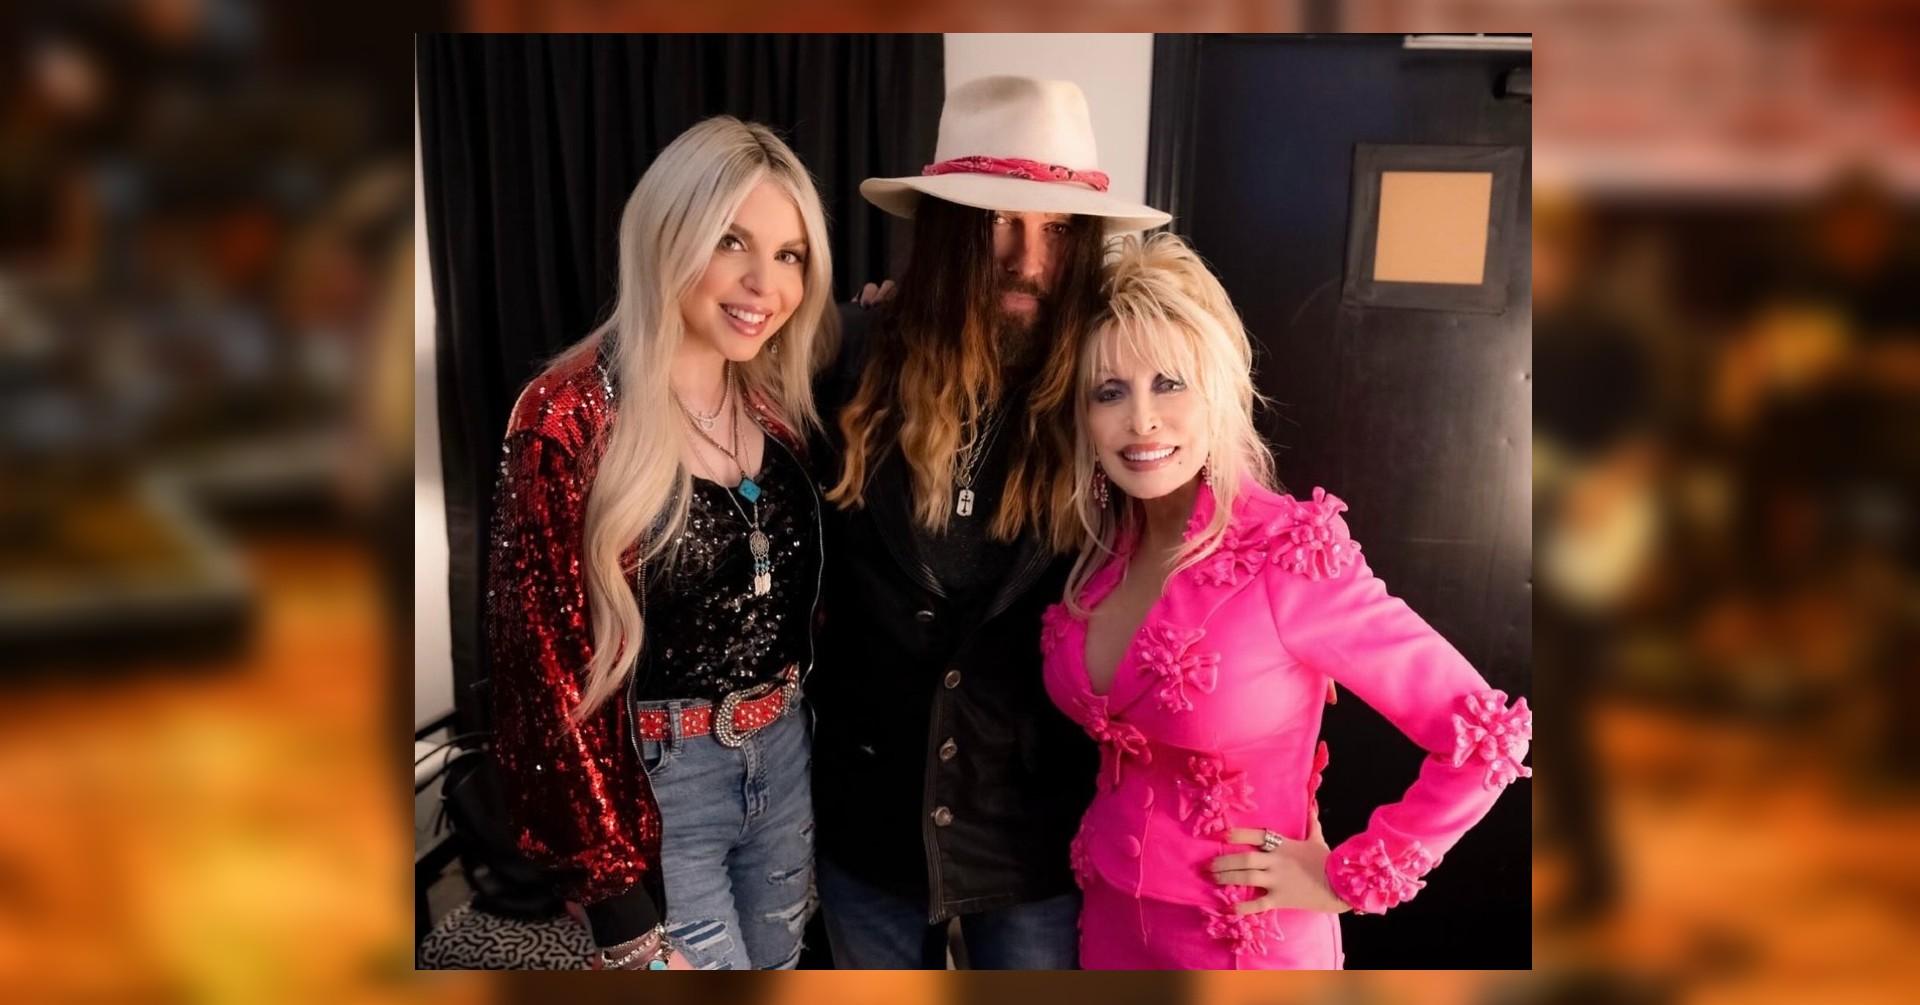 Billy Ray Cyrus Poses With Dolly Parton & New Wife Firerose: Photo